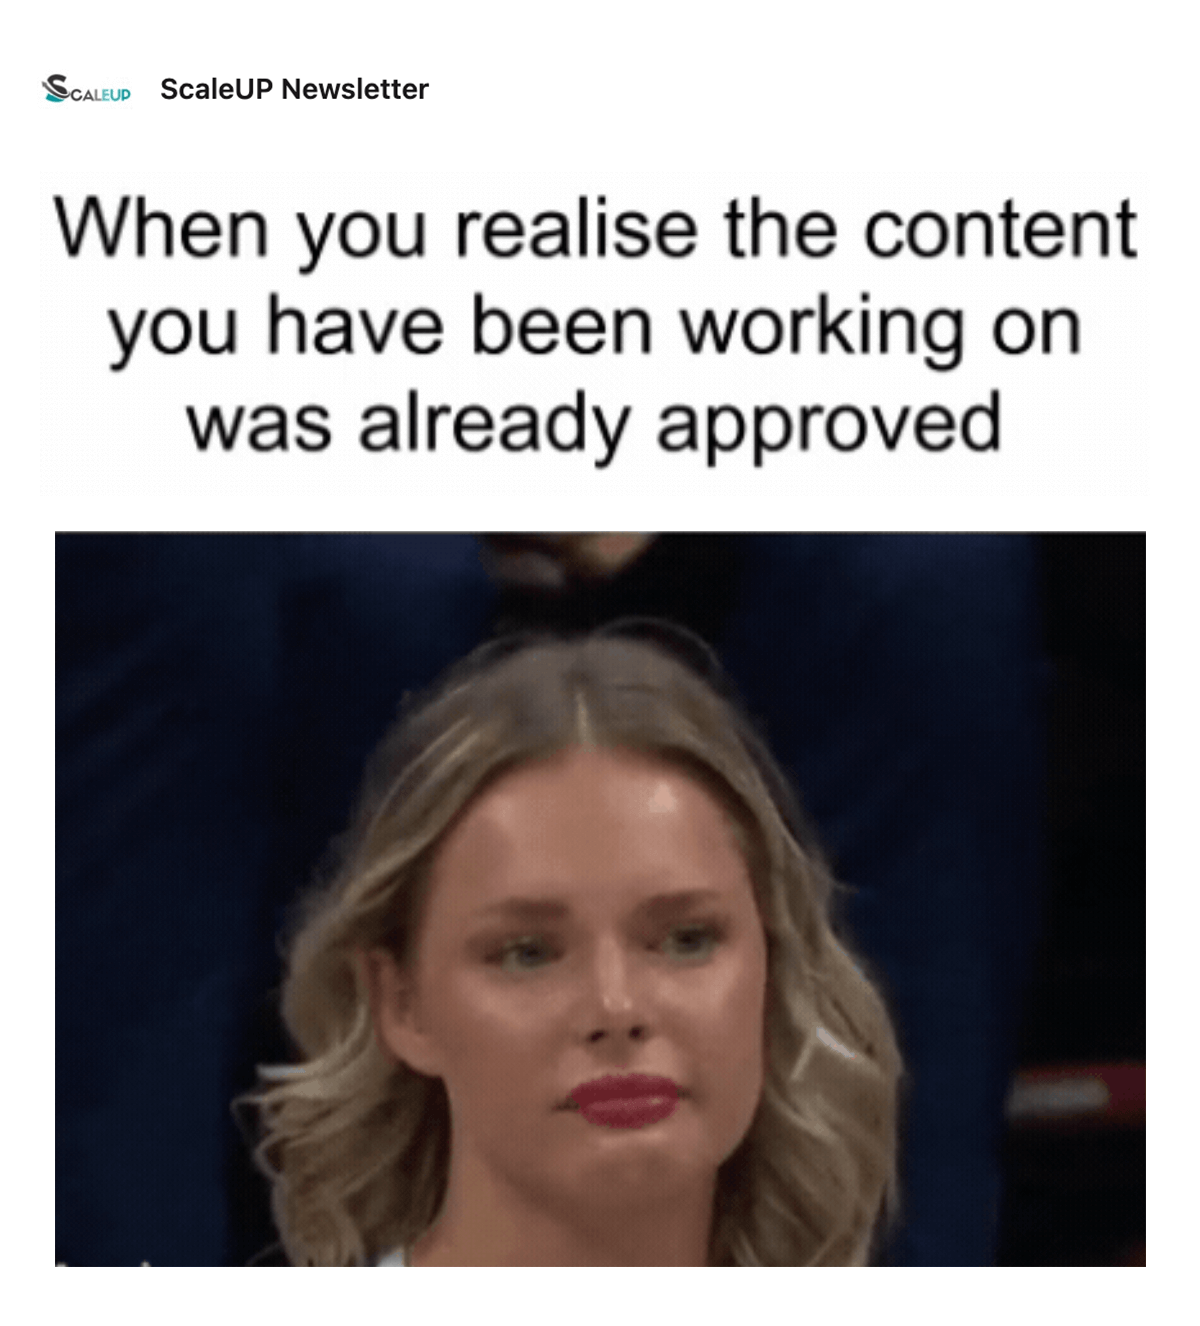 @ScaleUp Newsletter on LinkedIn: When you realise the content you have been working on was already approved. Image of a very sad person.